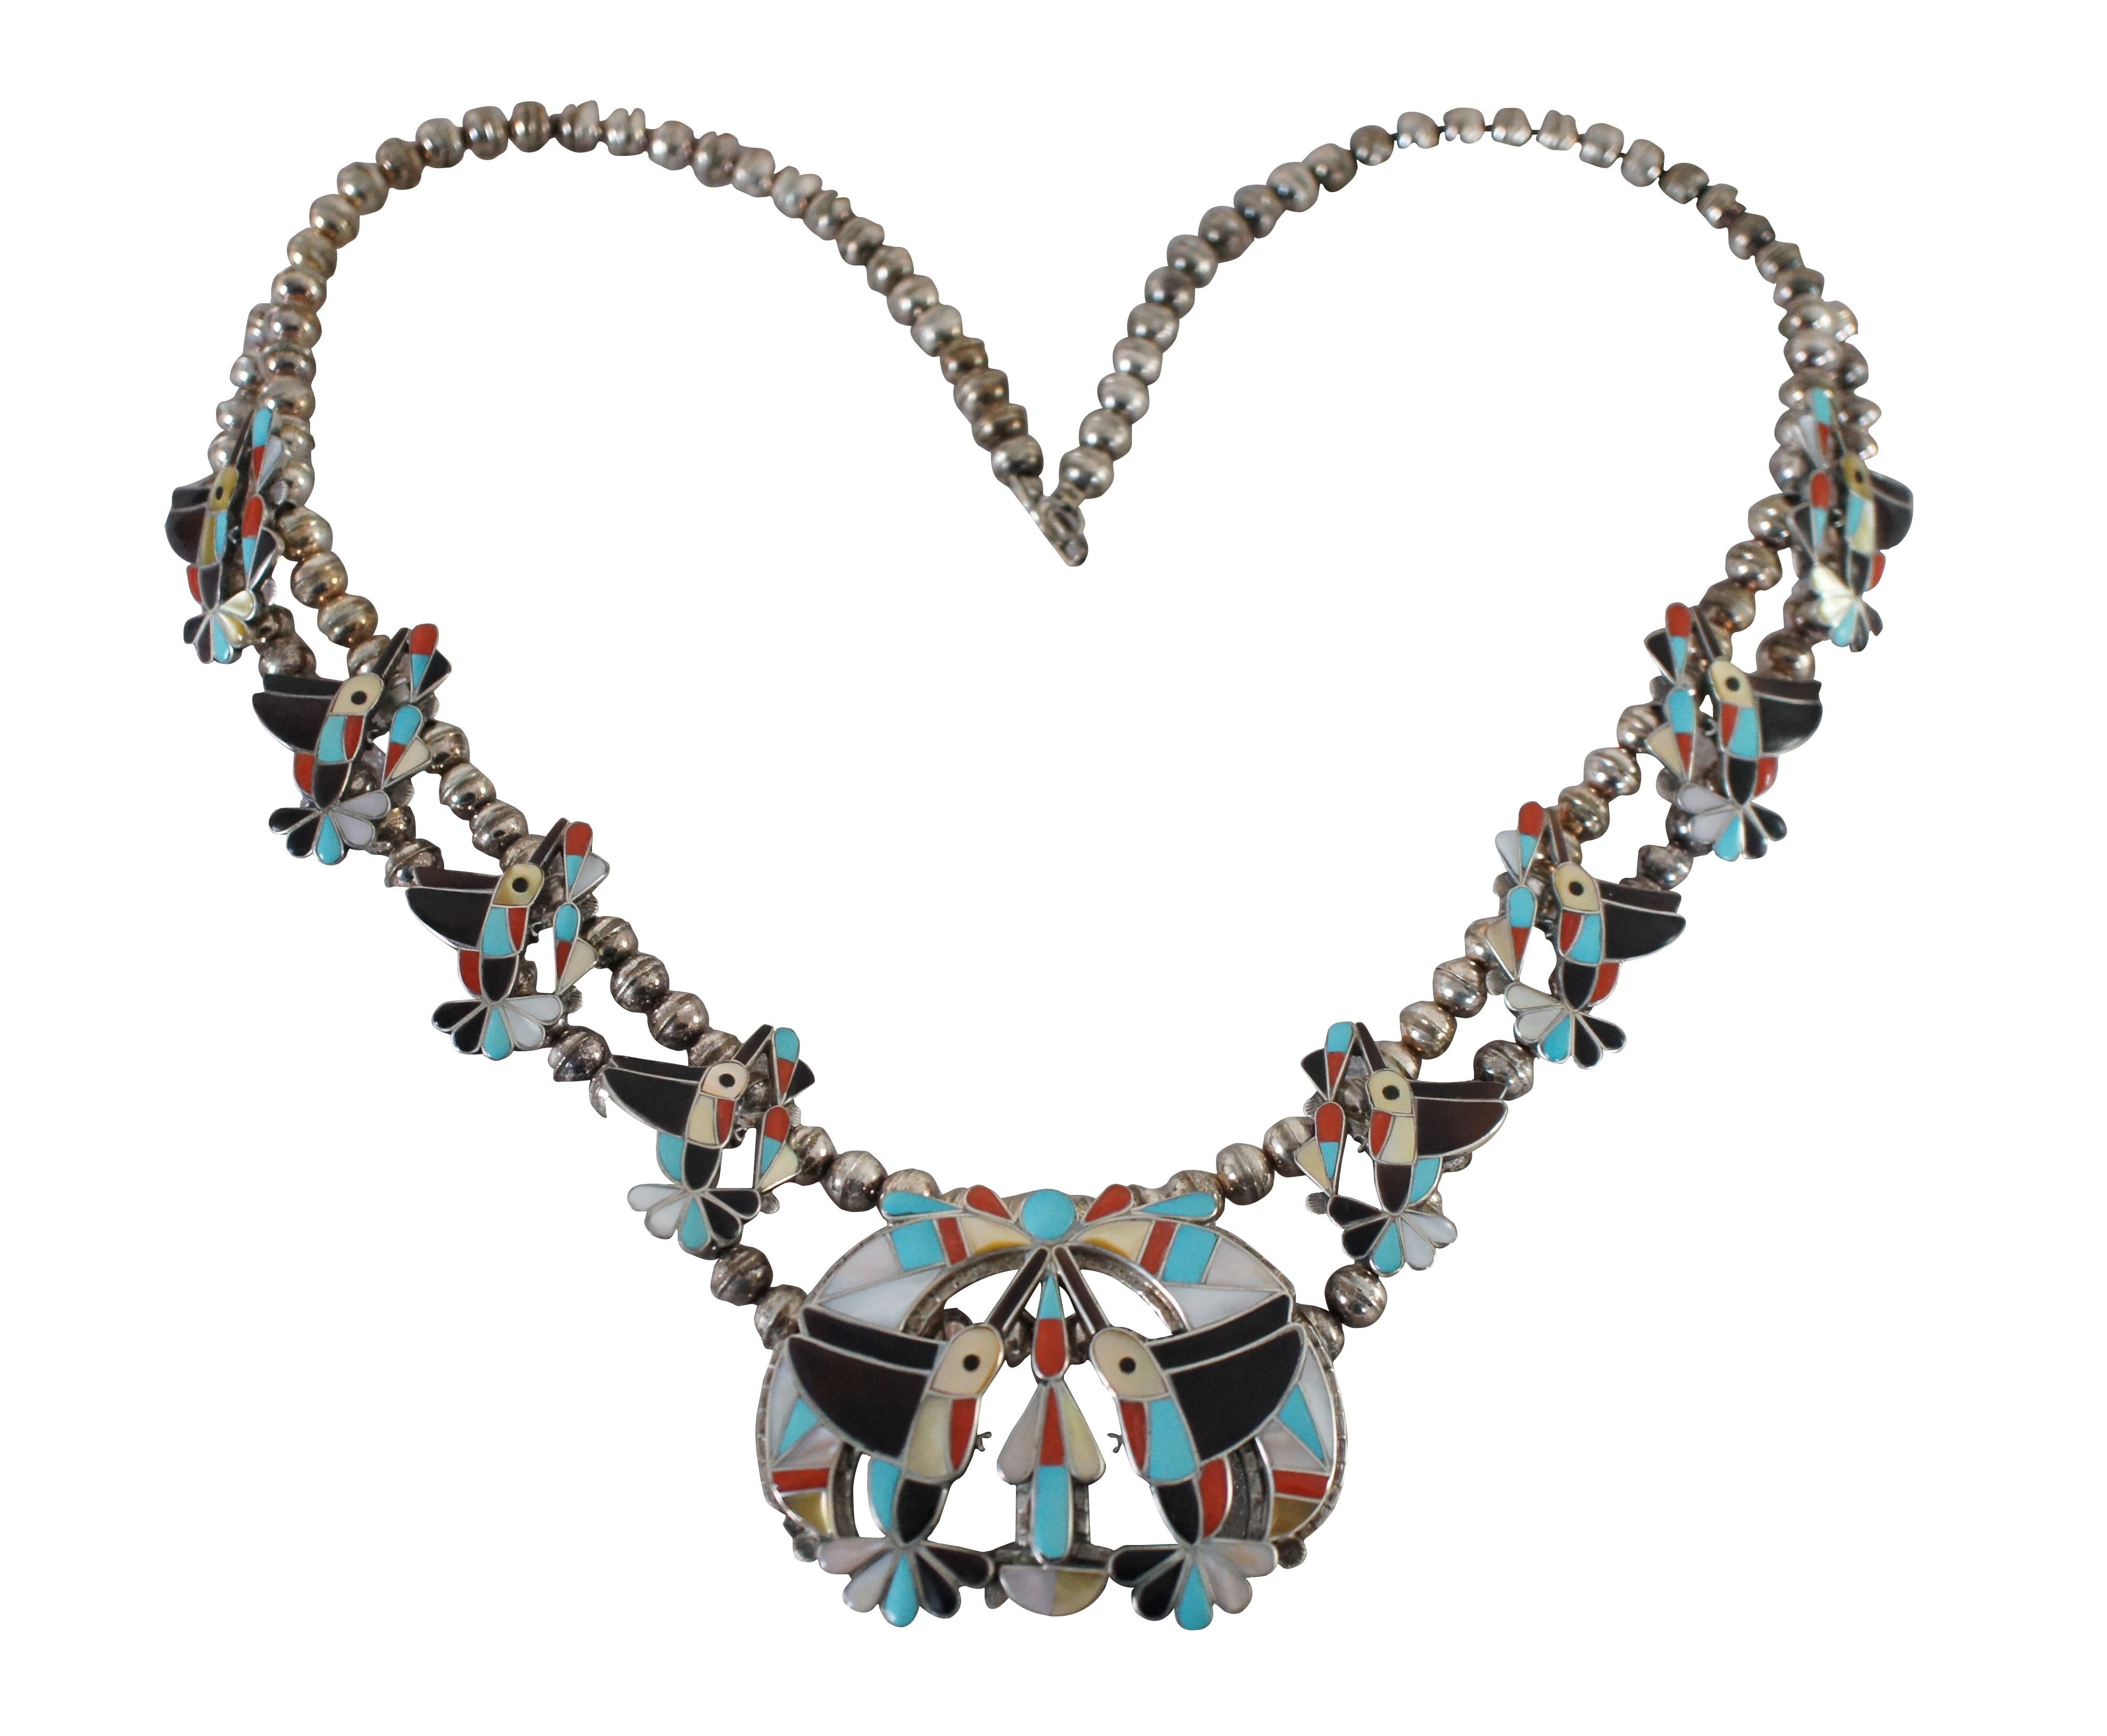 Impressive set of Native American Zuni jewelry featuring a beaded statement necklace, cuff bracelet, ring and earrings.  Each piece features sterling silver with hummingbird / squash blossom theme.  Beautifully inlaid birds with simple flowers and